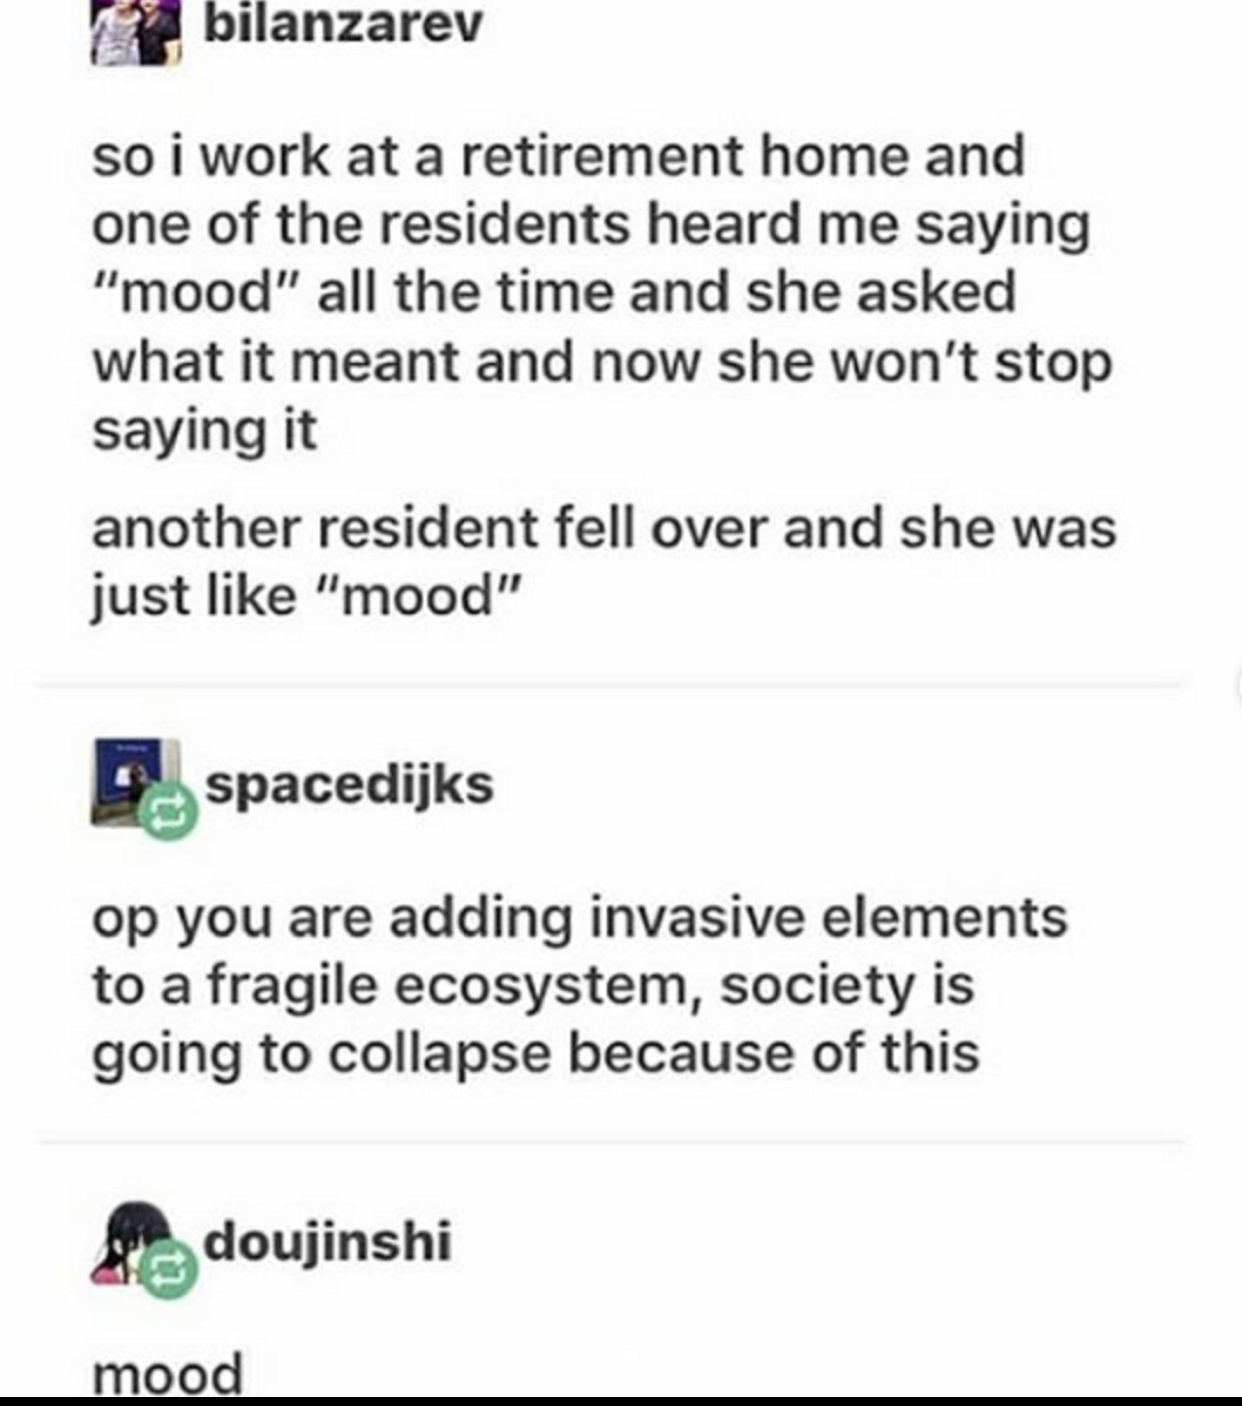 funny memes and tweets - document - bilanzarev so i work at a retirement home and one of the residents heard me saying "mood" all the time and she asked what it meant and now she won't stop saying it another resident fell over and she was just "mood" spac